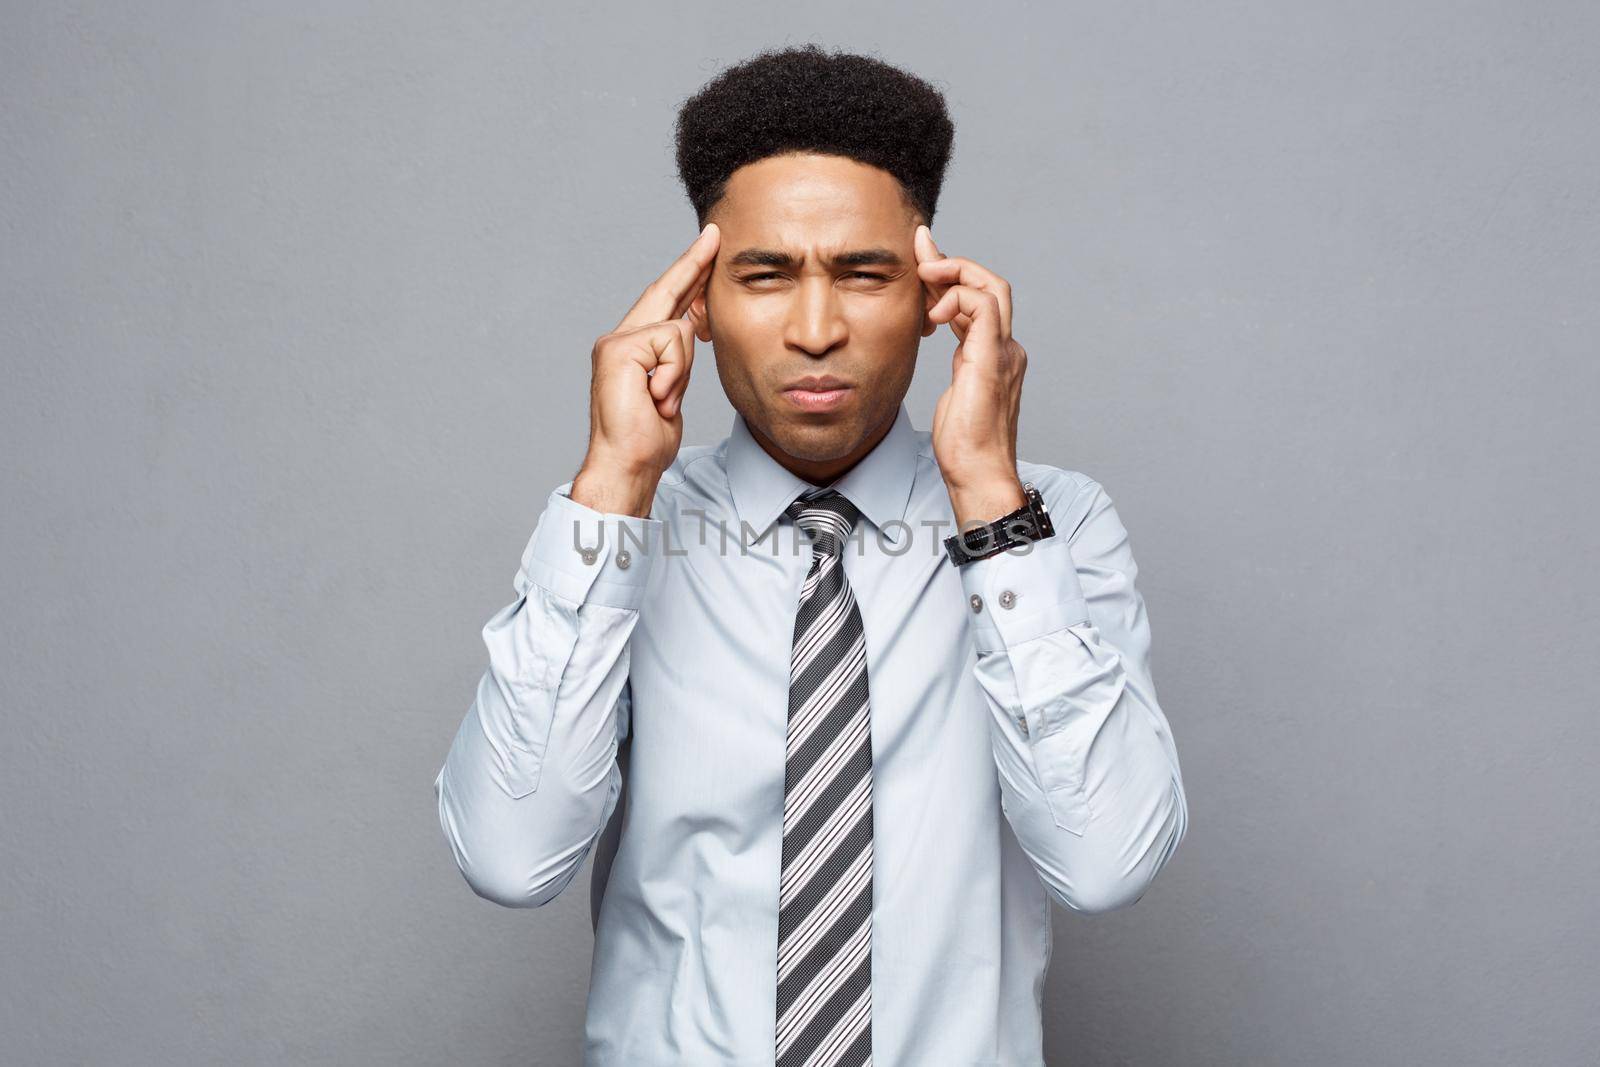 Business concept - portrait of frustrated stressed African American business man on grey background